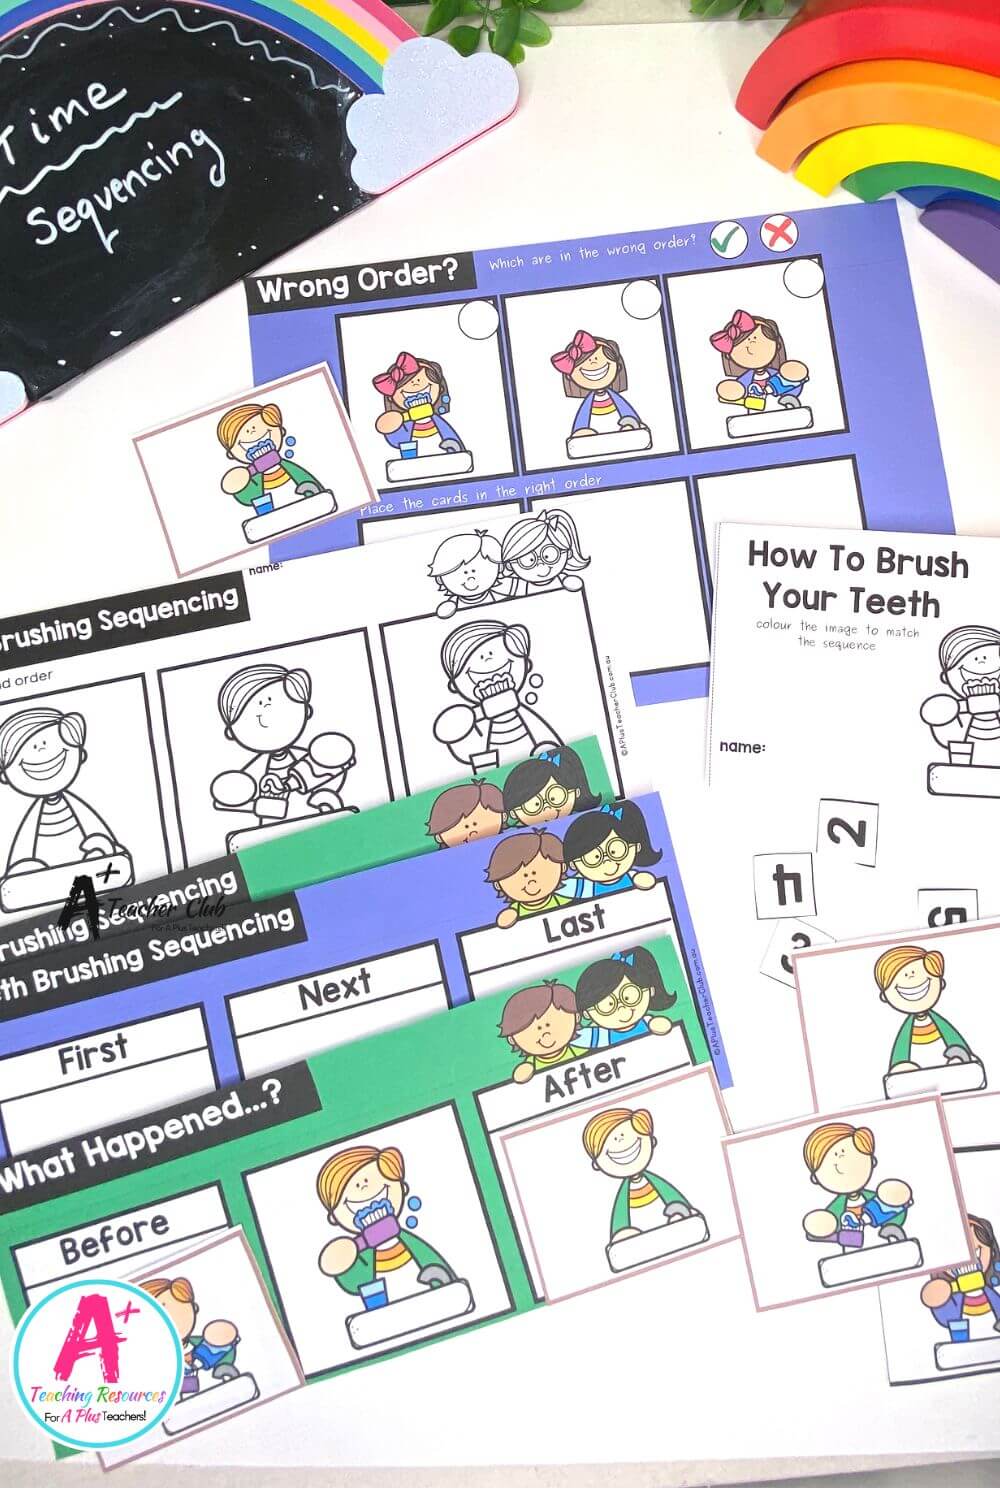 3-Step Sequencing Everyday Events - Brushing Teeth Activities Pack